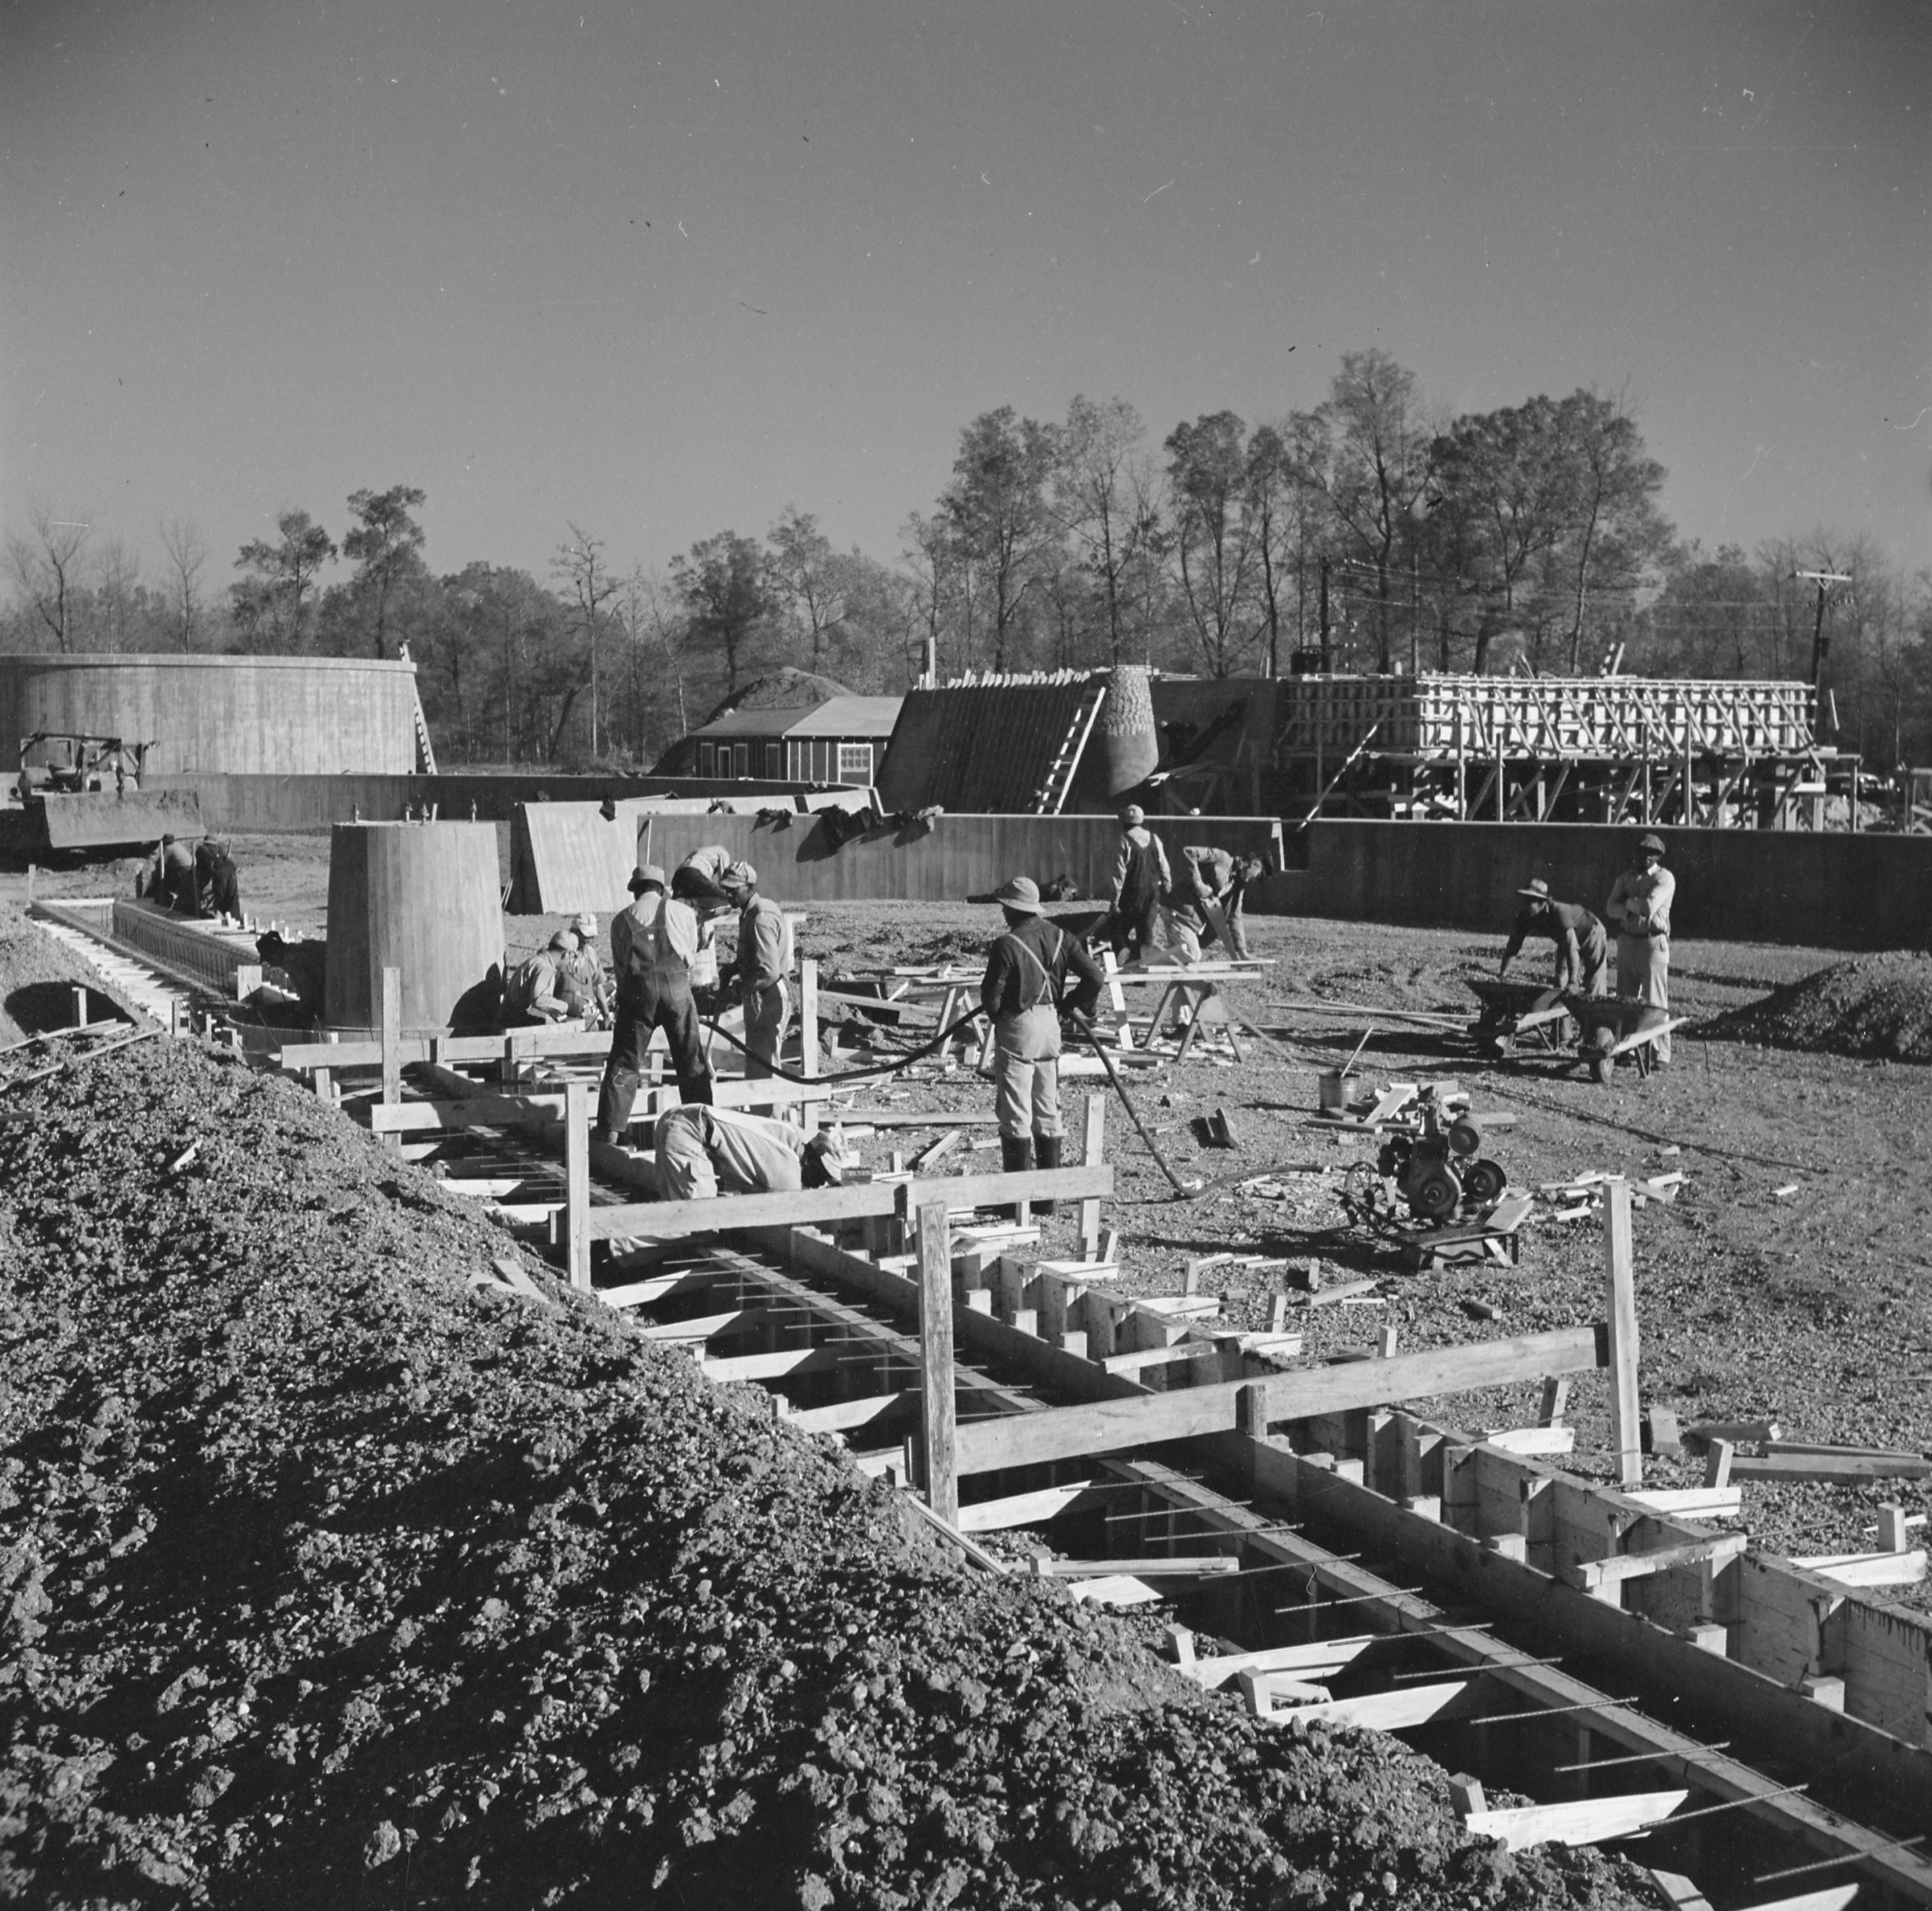 Construction of the sewage disposal plant at Jerome War Relocation Center, Arkansas, United States, 14 Nov 1942, photo 1 of 5